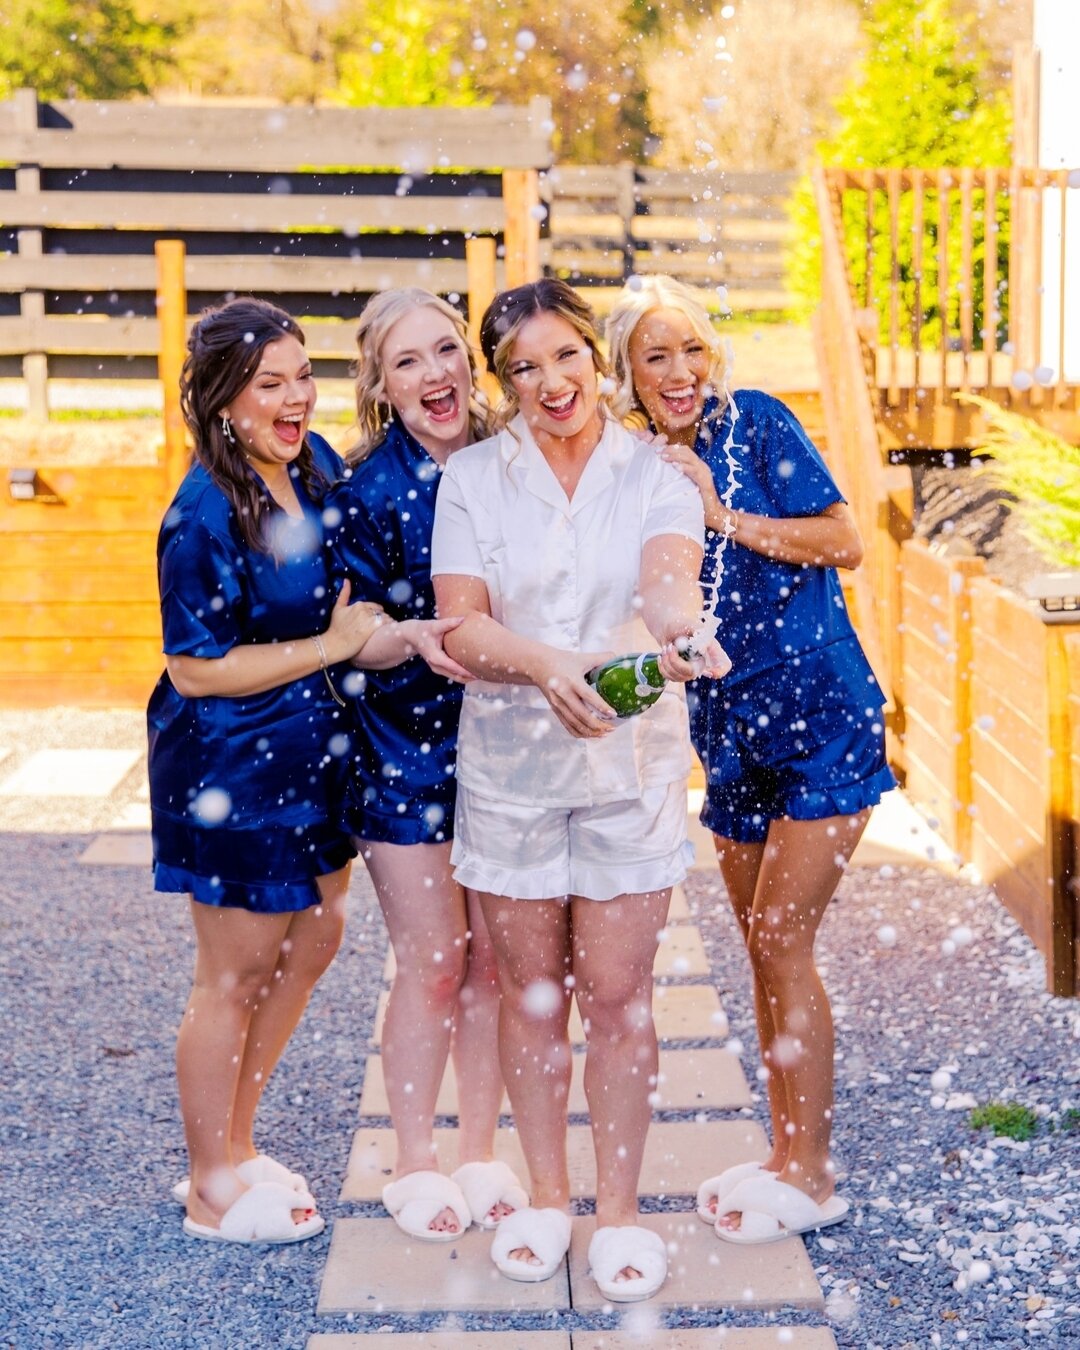 TIPS FOR CHAMPAGNE POP 🍾⁣WEDDING TIPS WEDNESDAY - Week 2! 
SAVE this post for later!! 💍

Here are some of my tips for a killer champagne shot like this one: ✨
- put your thumb partially over the bottle and SHAKE SHAKE 🍾
- have an extra bottle on h